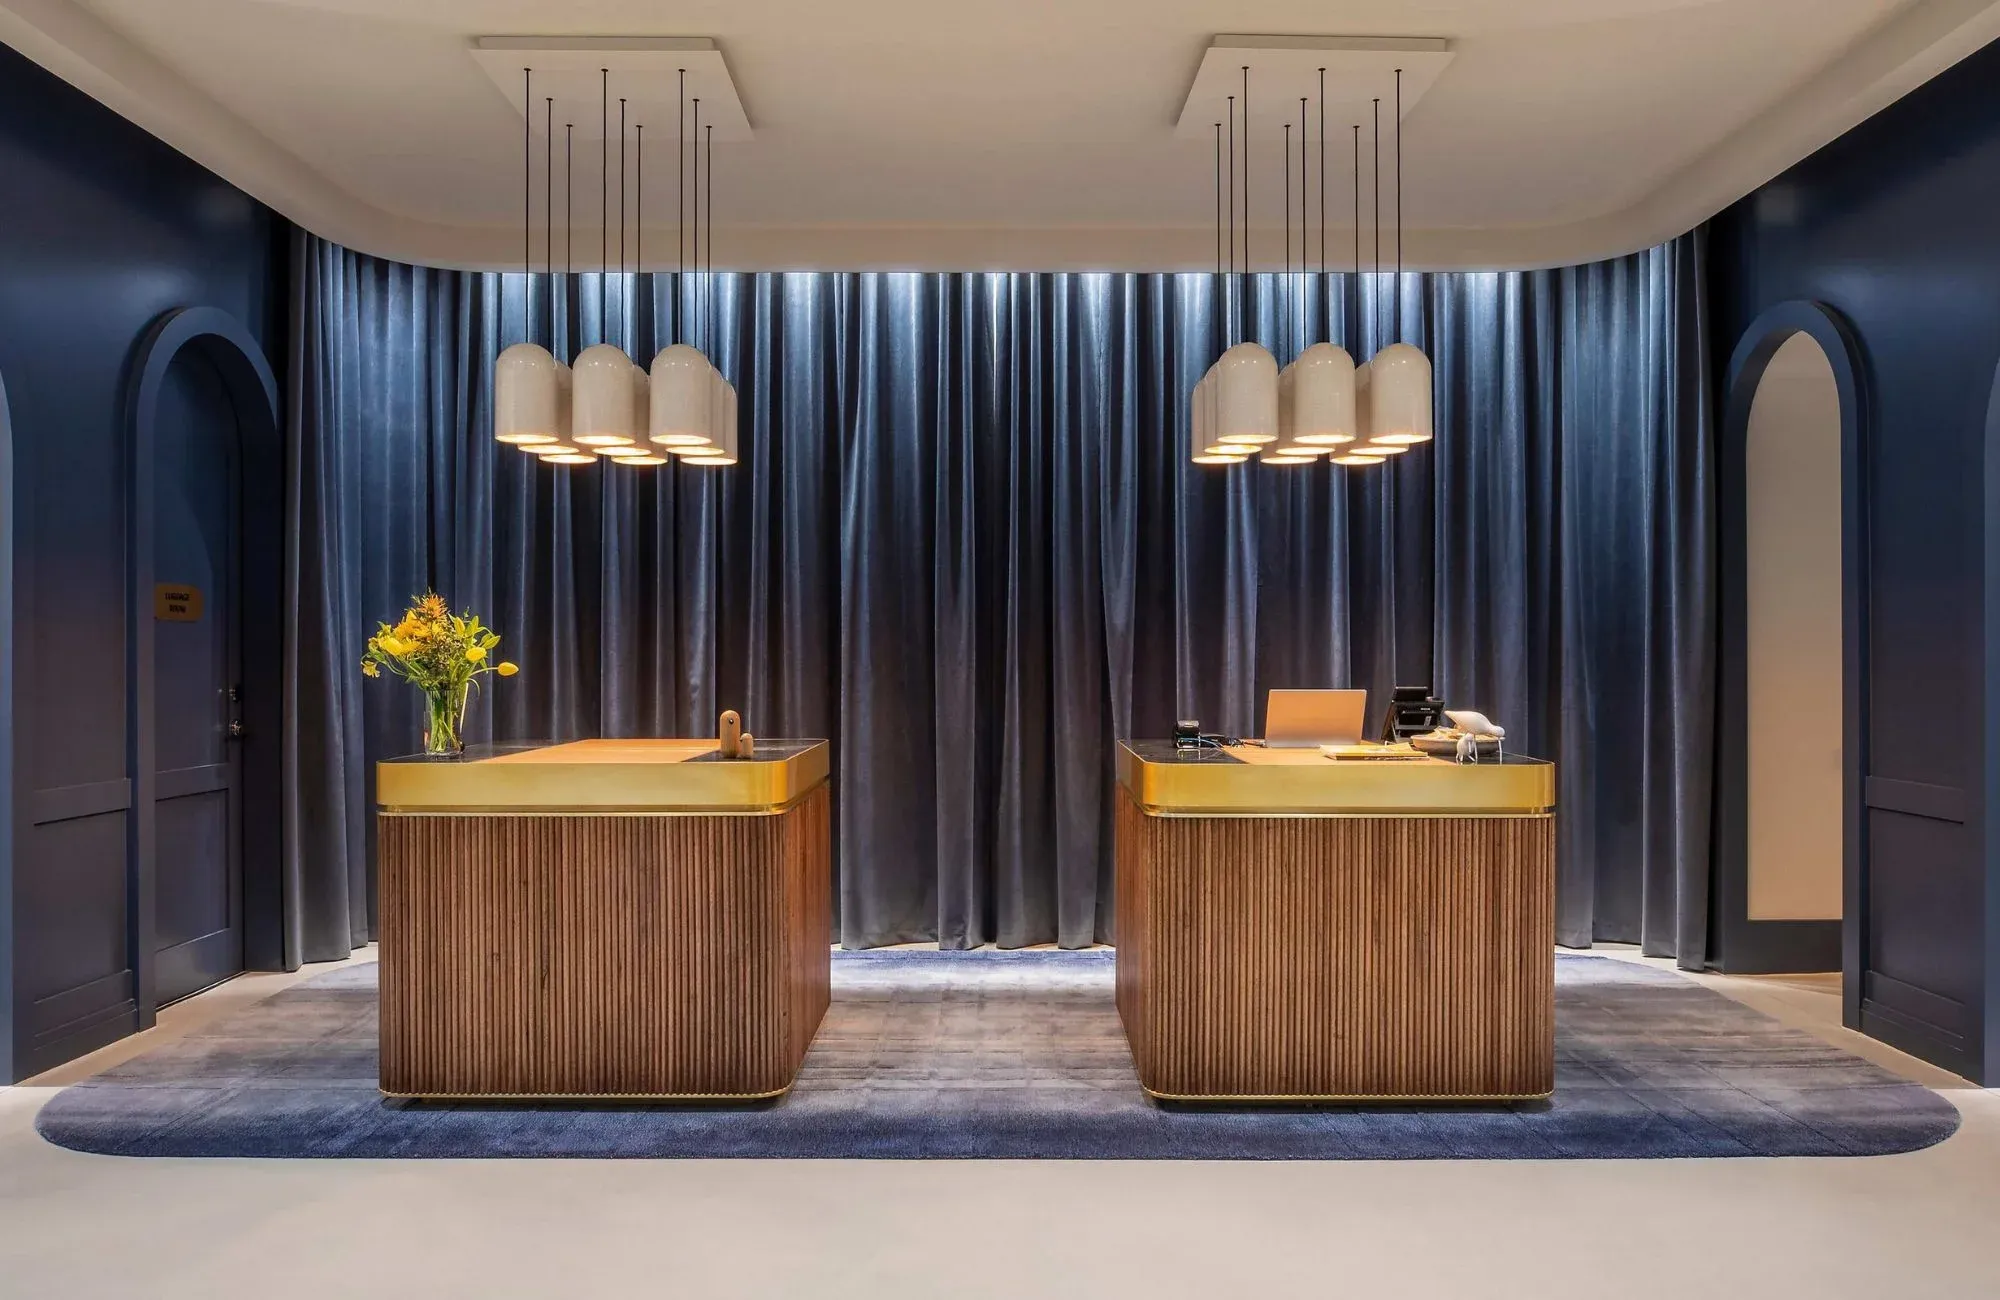 Voco Melbourne Central by IHG Hotels & Resorts. Foyer feature two point of sale reception desks 